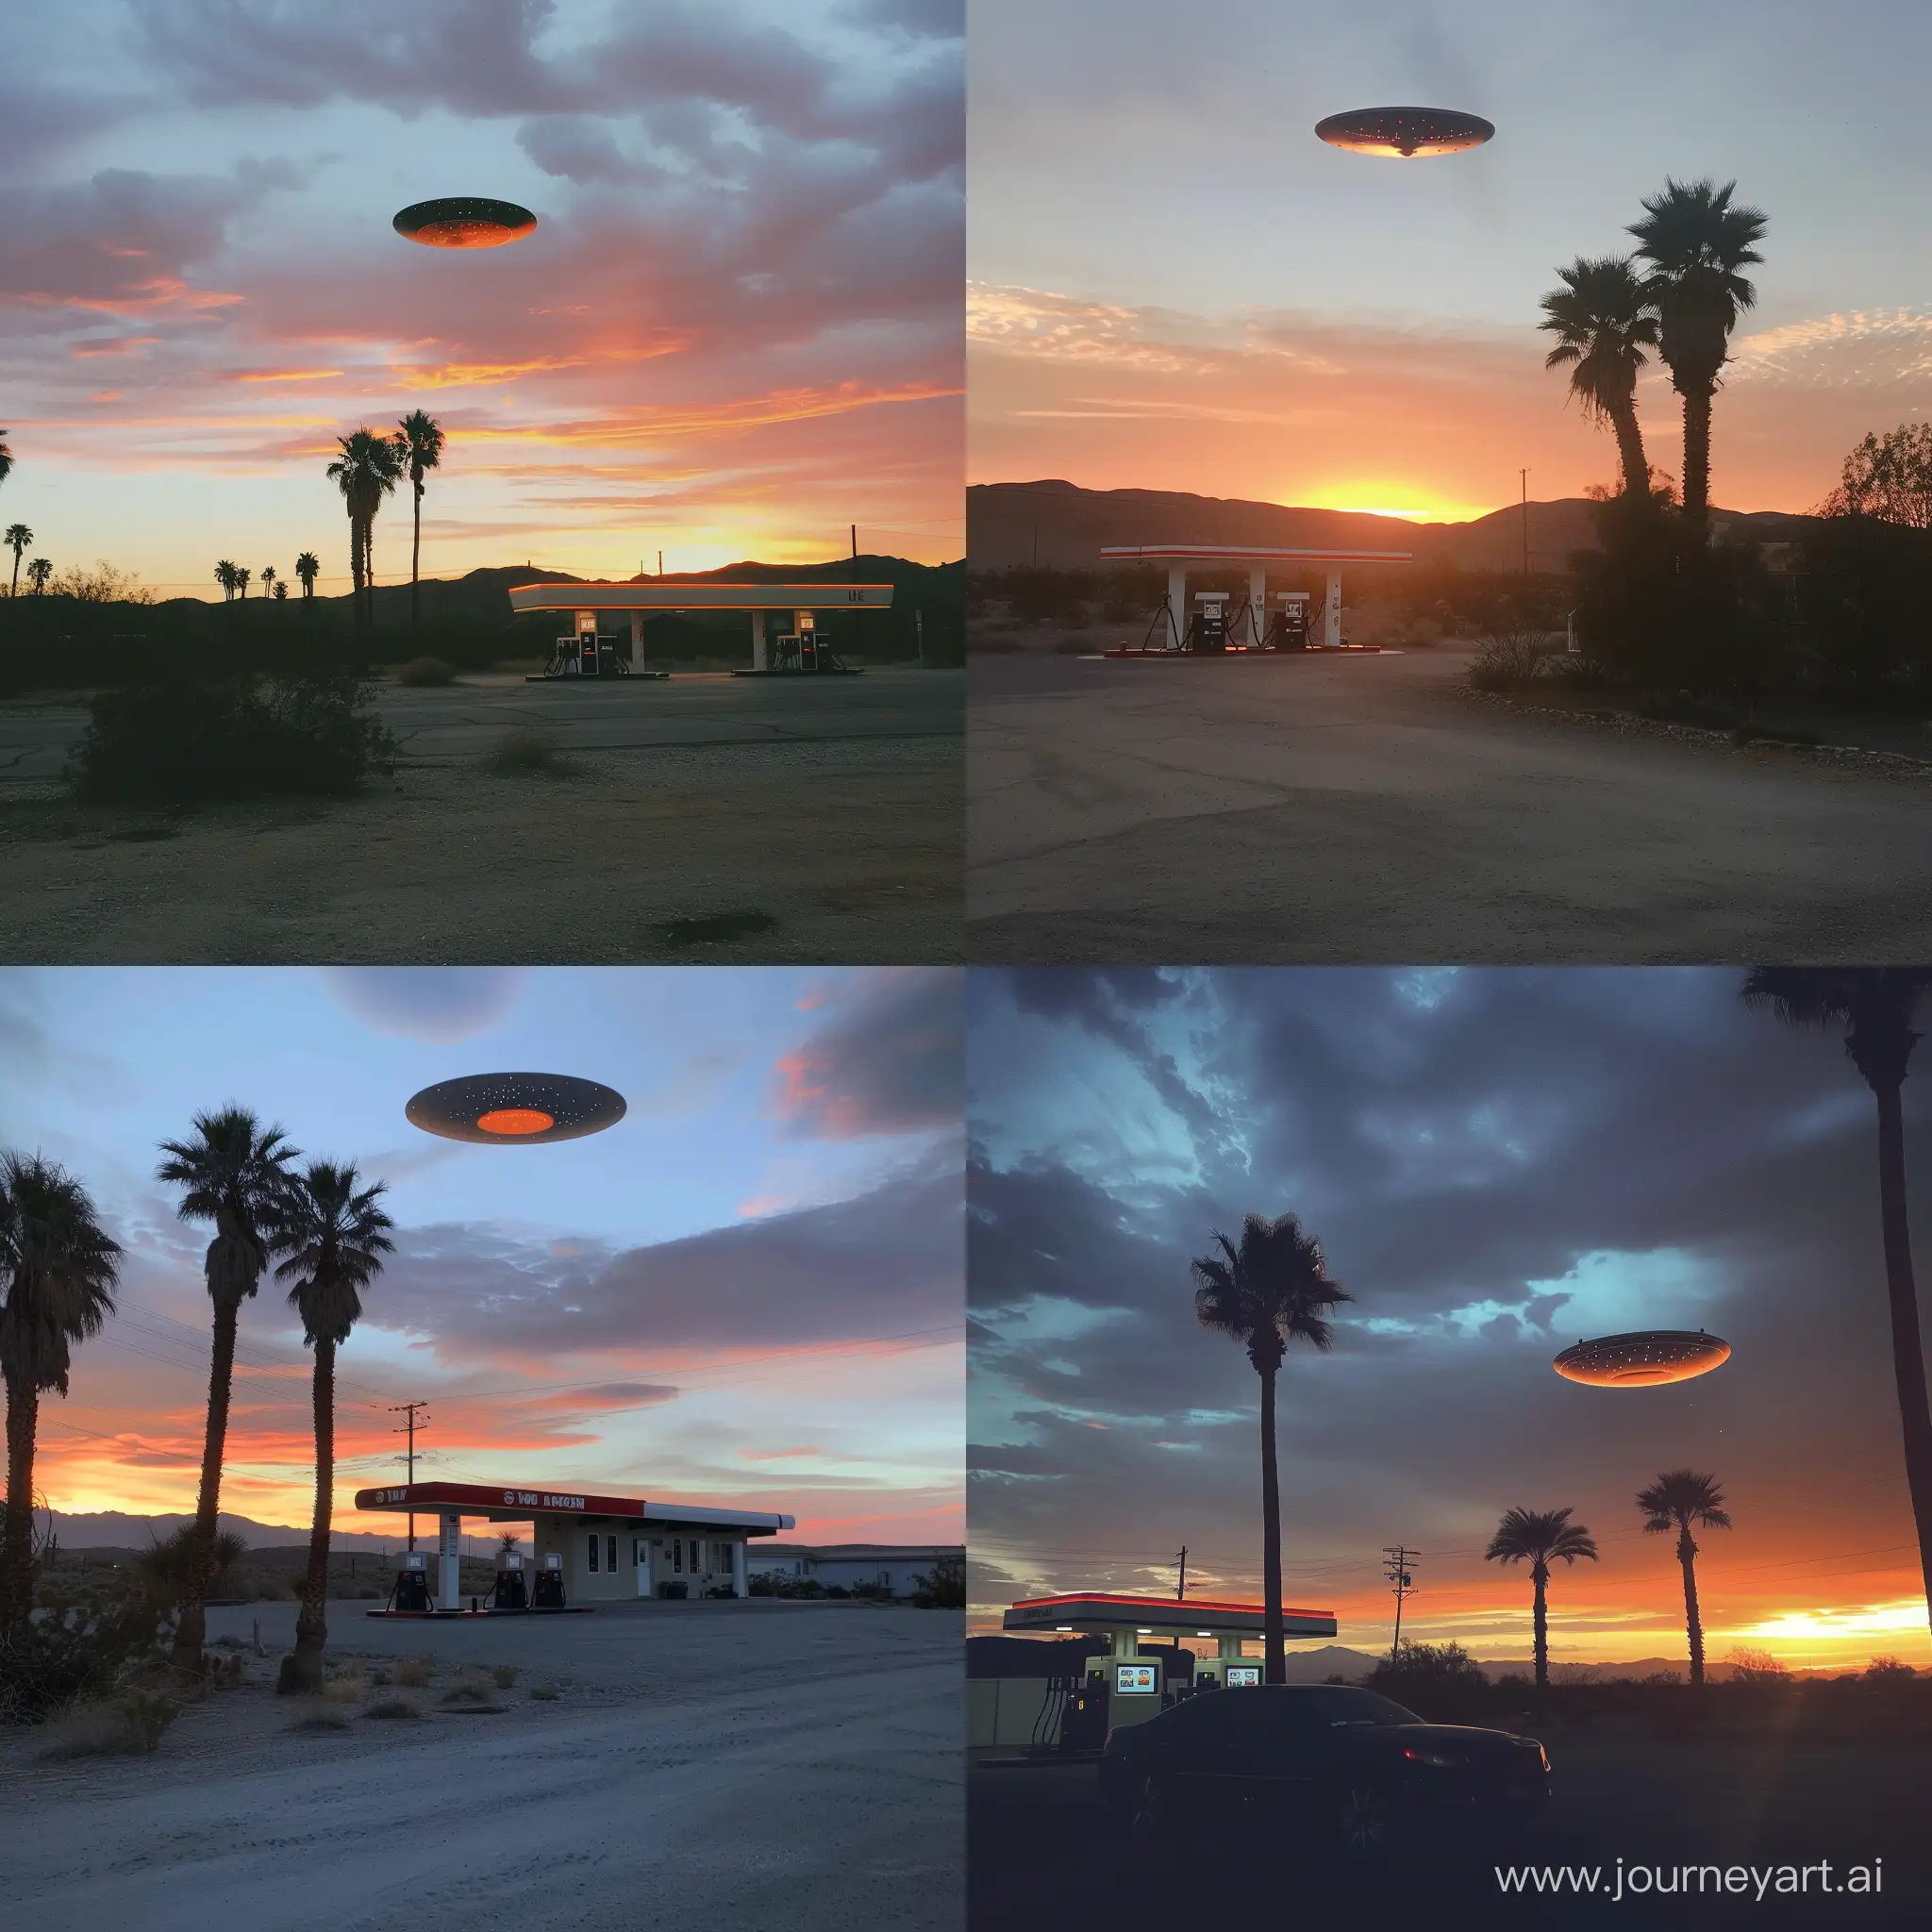 Surreal-Sunset-at-a-Desert-Gas-Station-with-Little-Palms-and-UFO